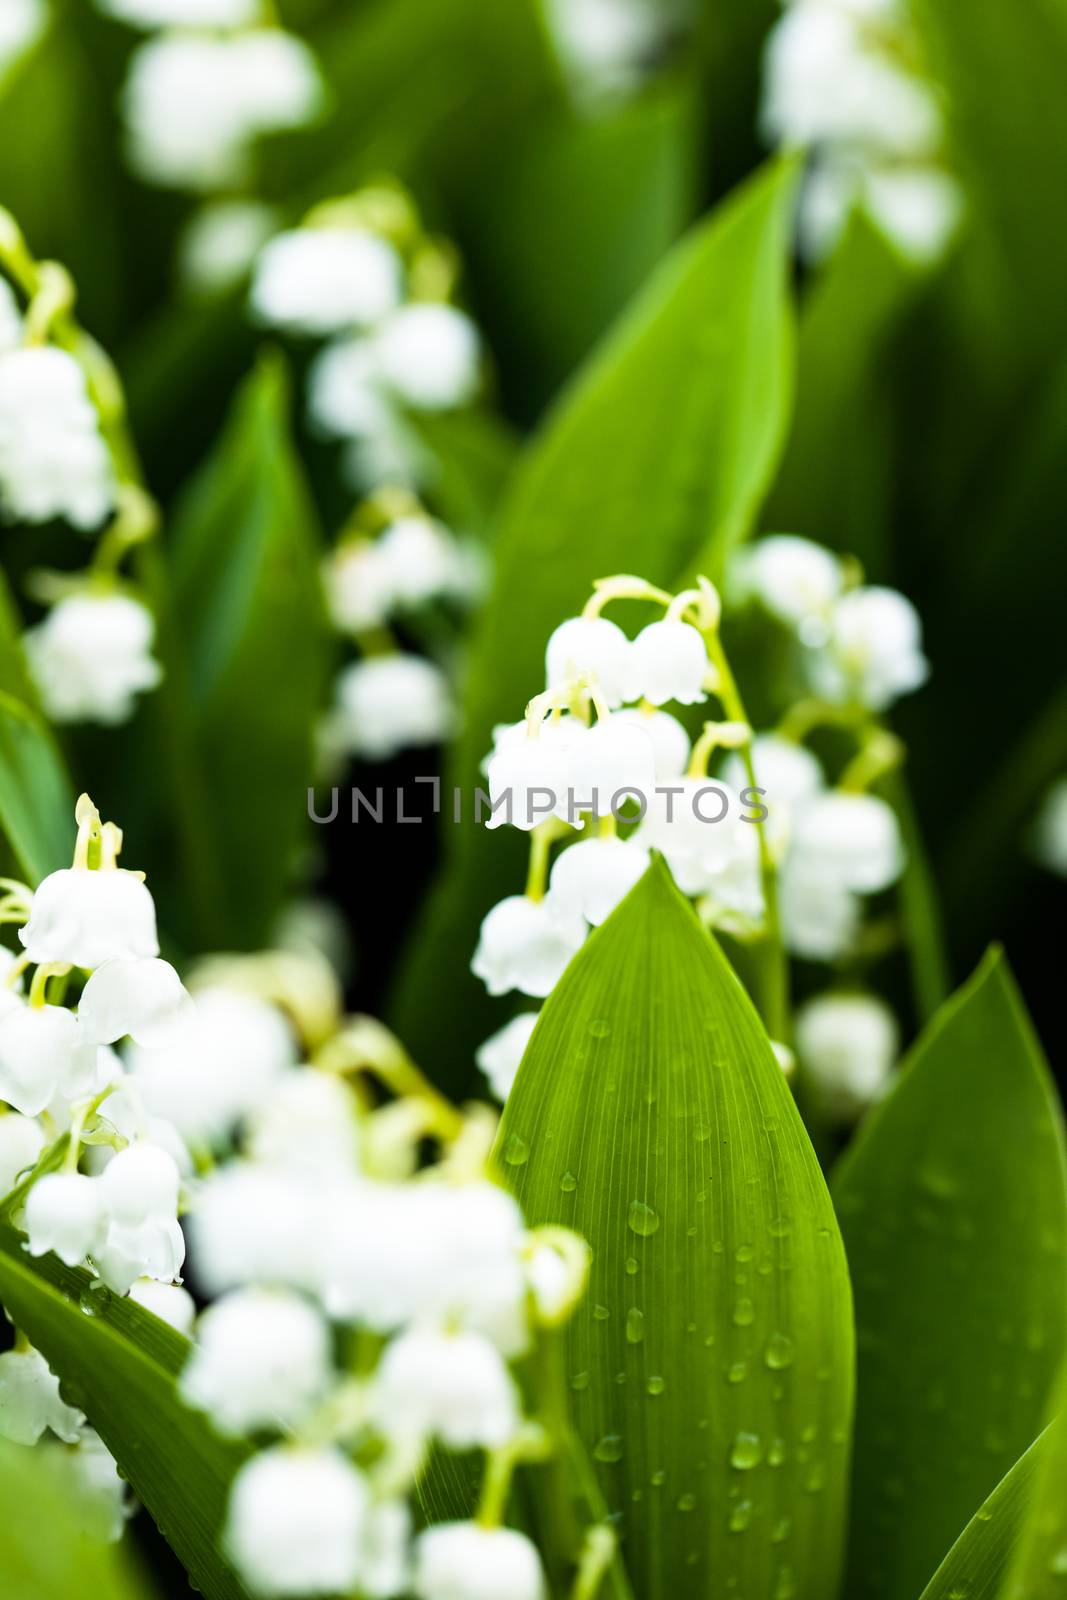 Lily of the valley flowers with water drops on green background. Convallaria majalis